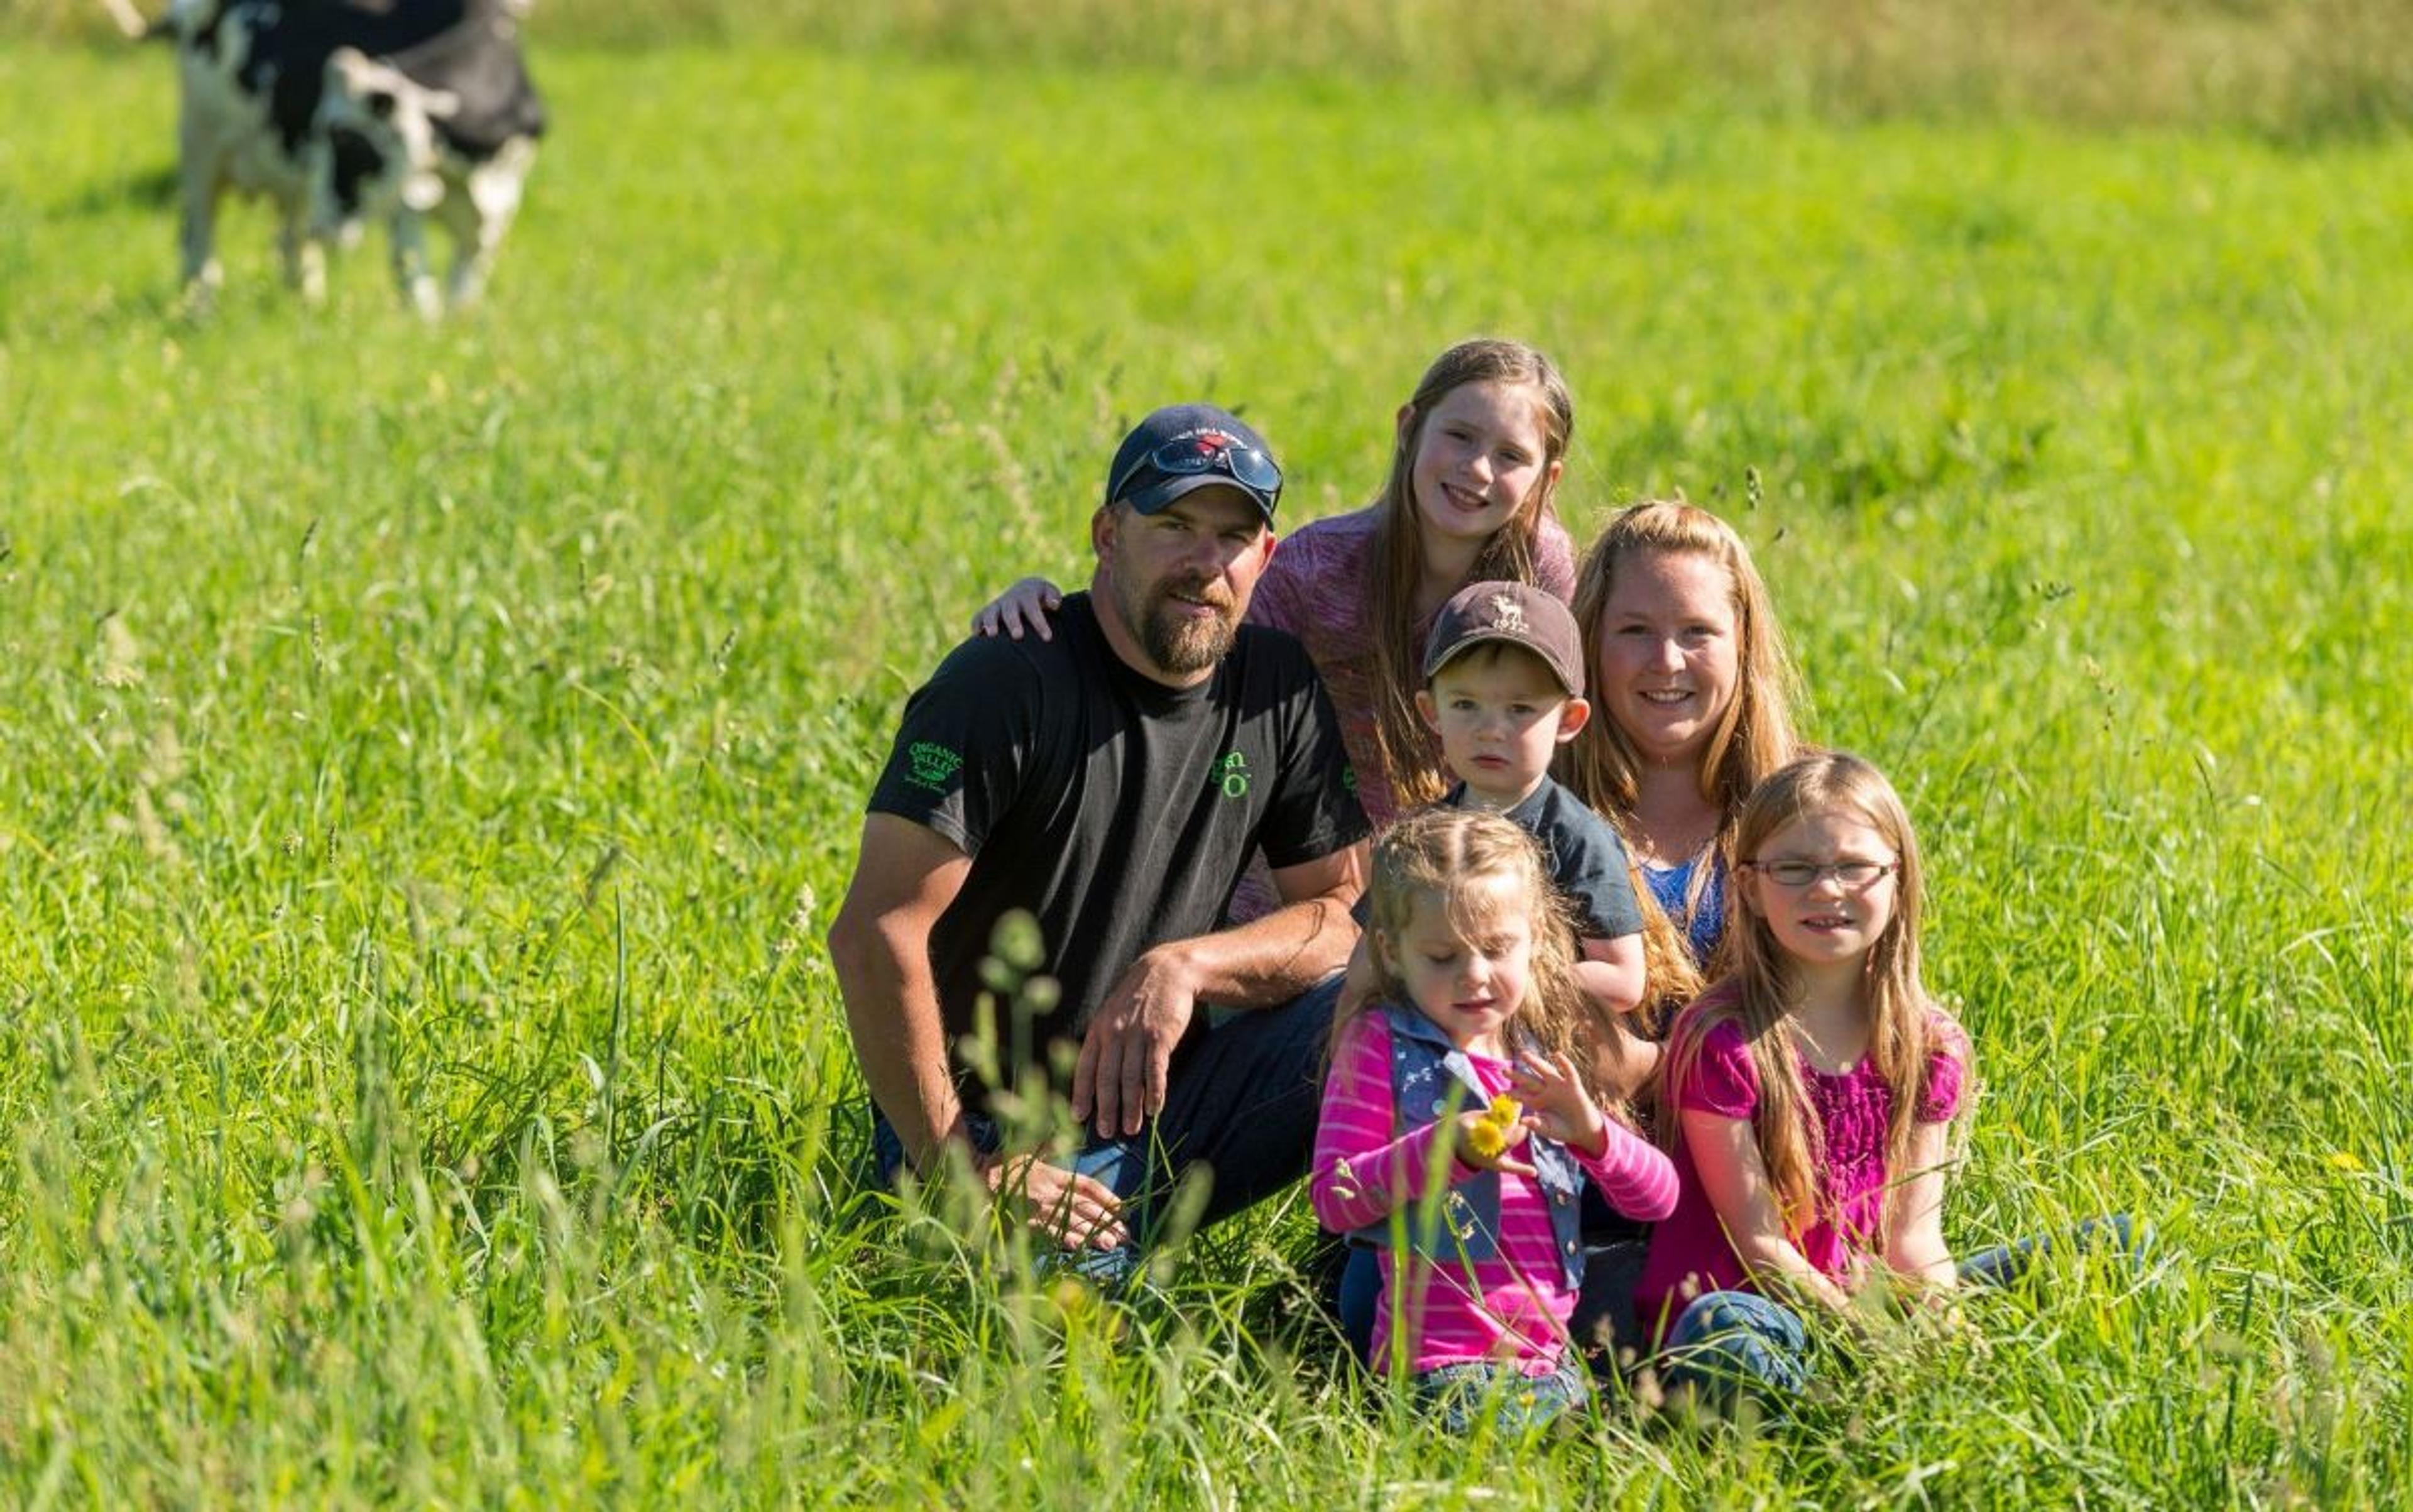 The Collman family stops for a photo in a field.